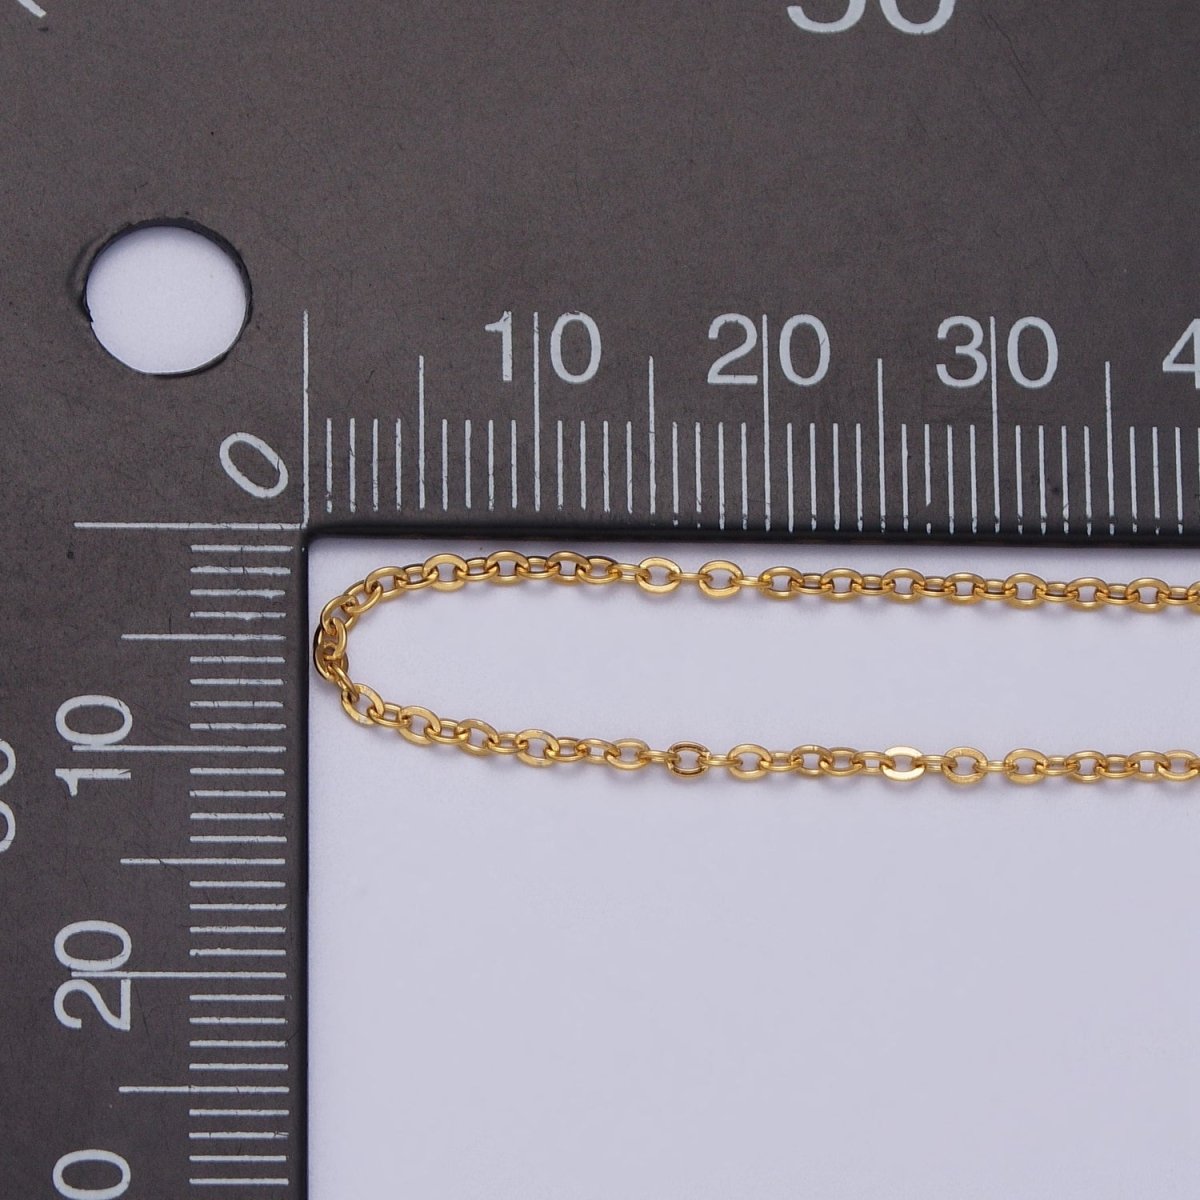 24K Gold Filled Mini 1.5mm Cable Unfinished Chain in Gold & Silver | ROLL-951 ROLL-952 - DLUXCA